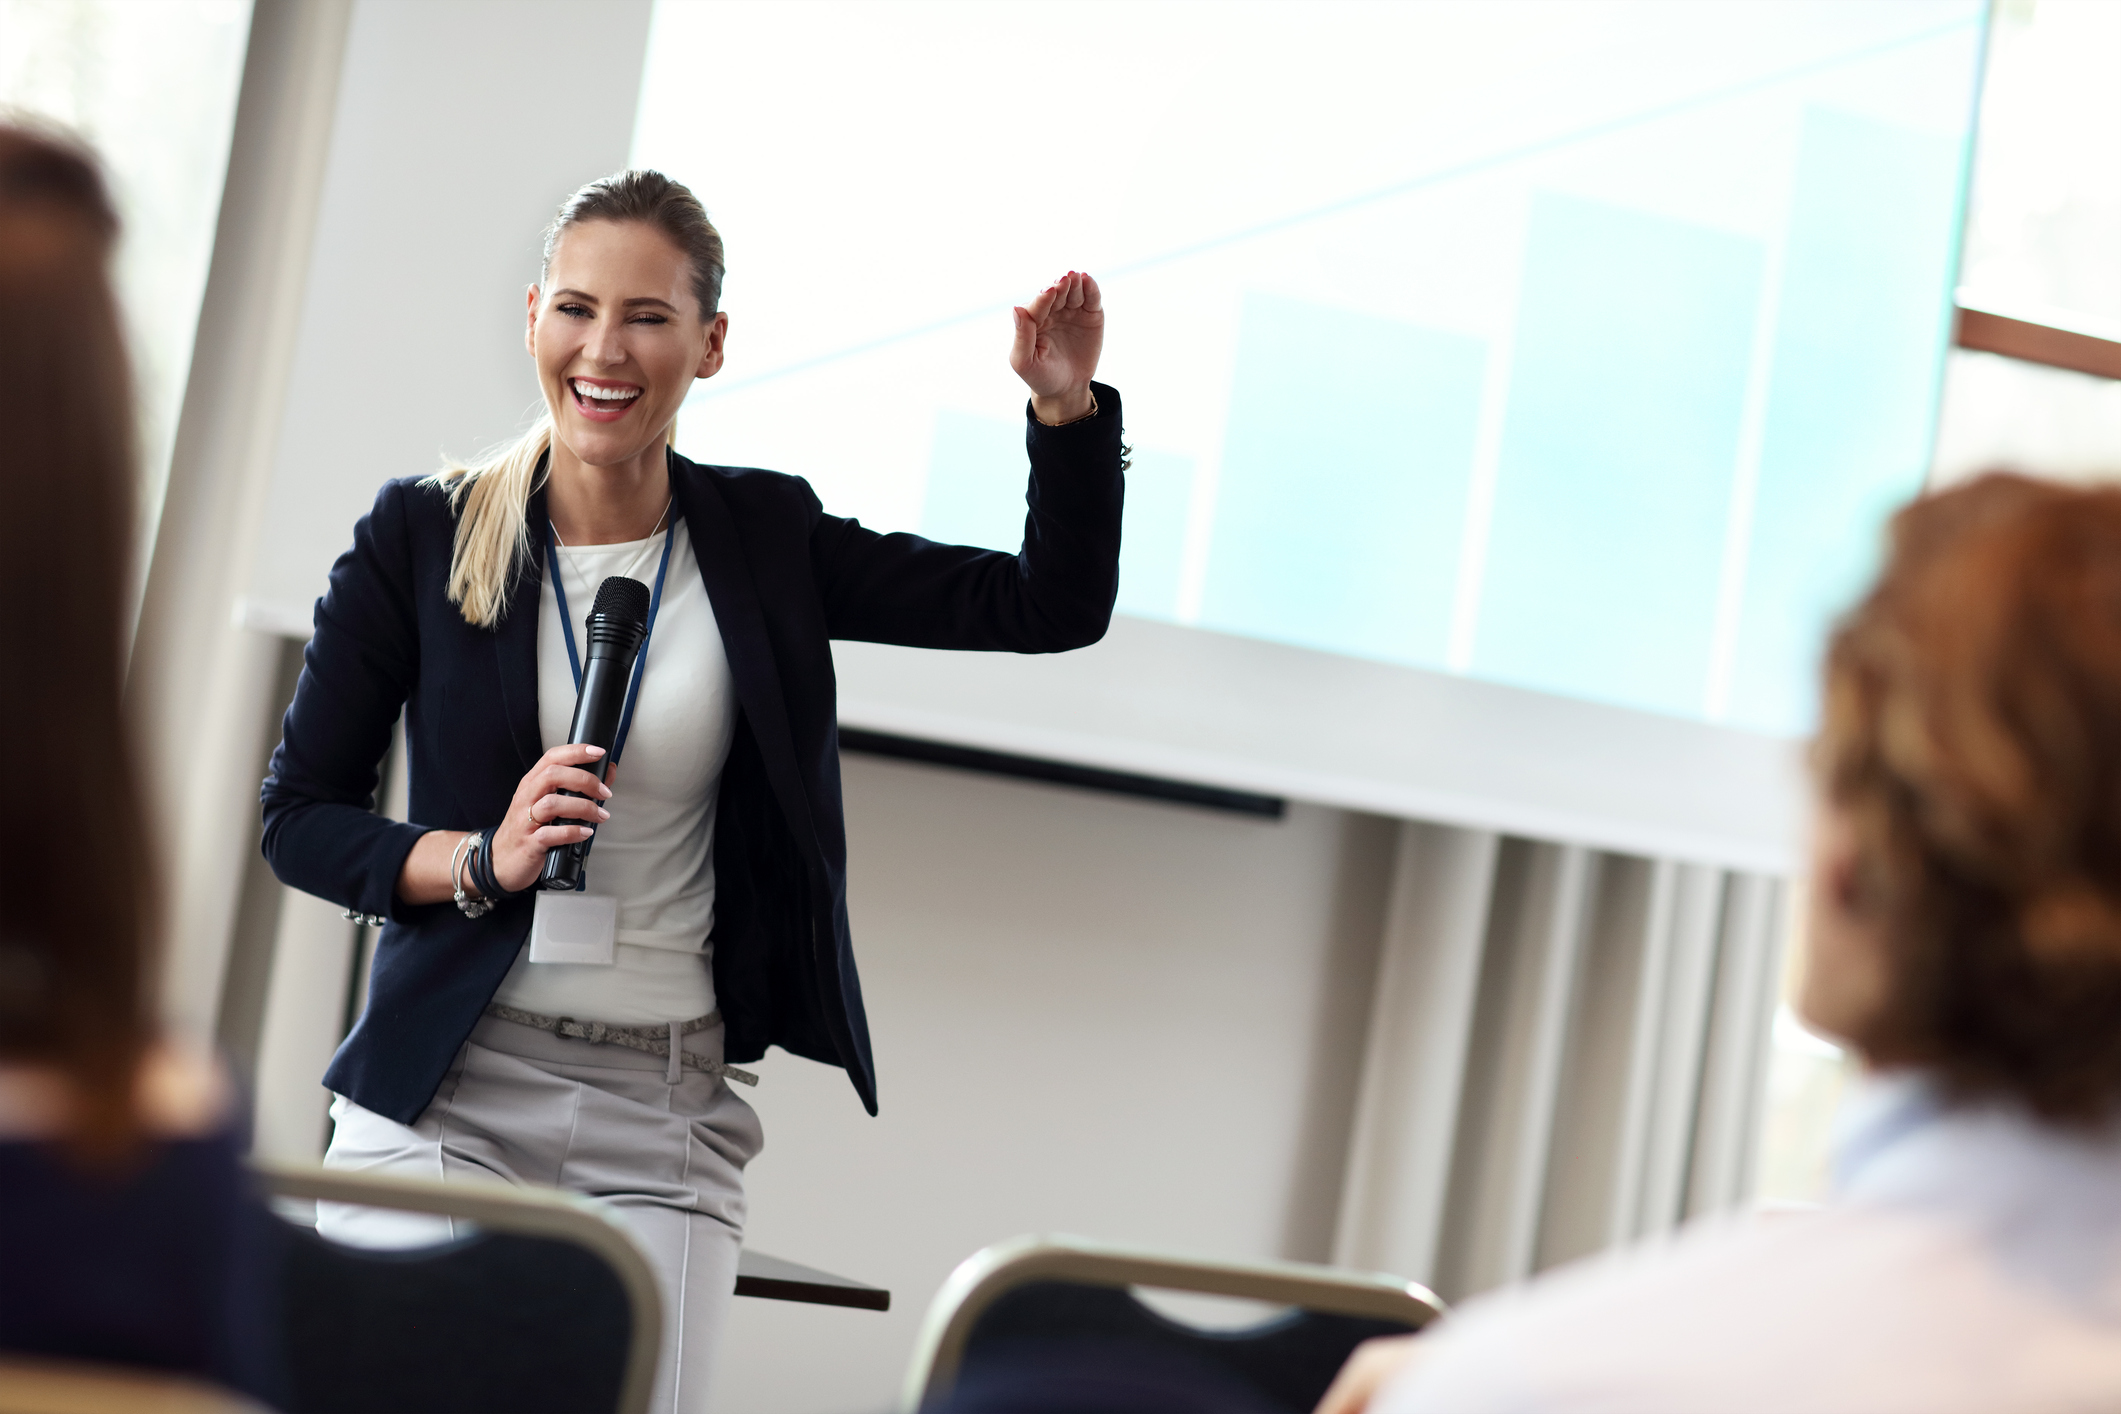 "Treating performance anxiety". A woman holding a microphone in front of a crowd shares a laugh.